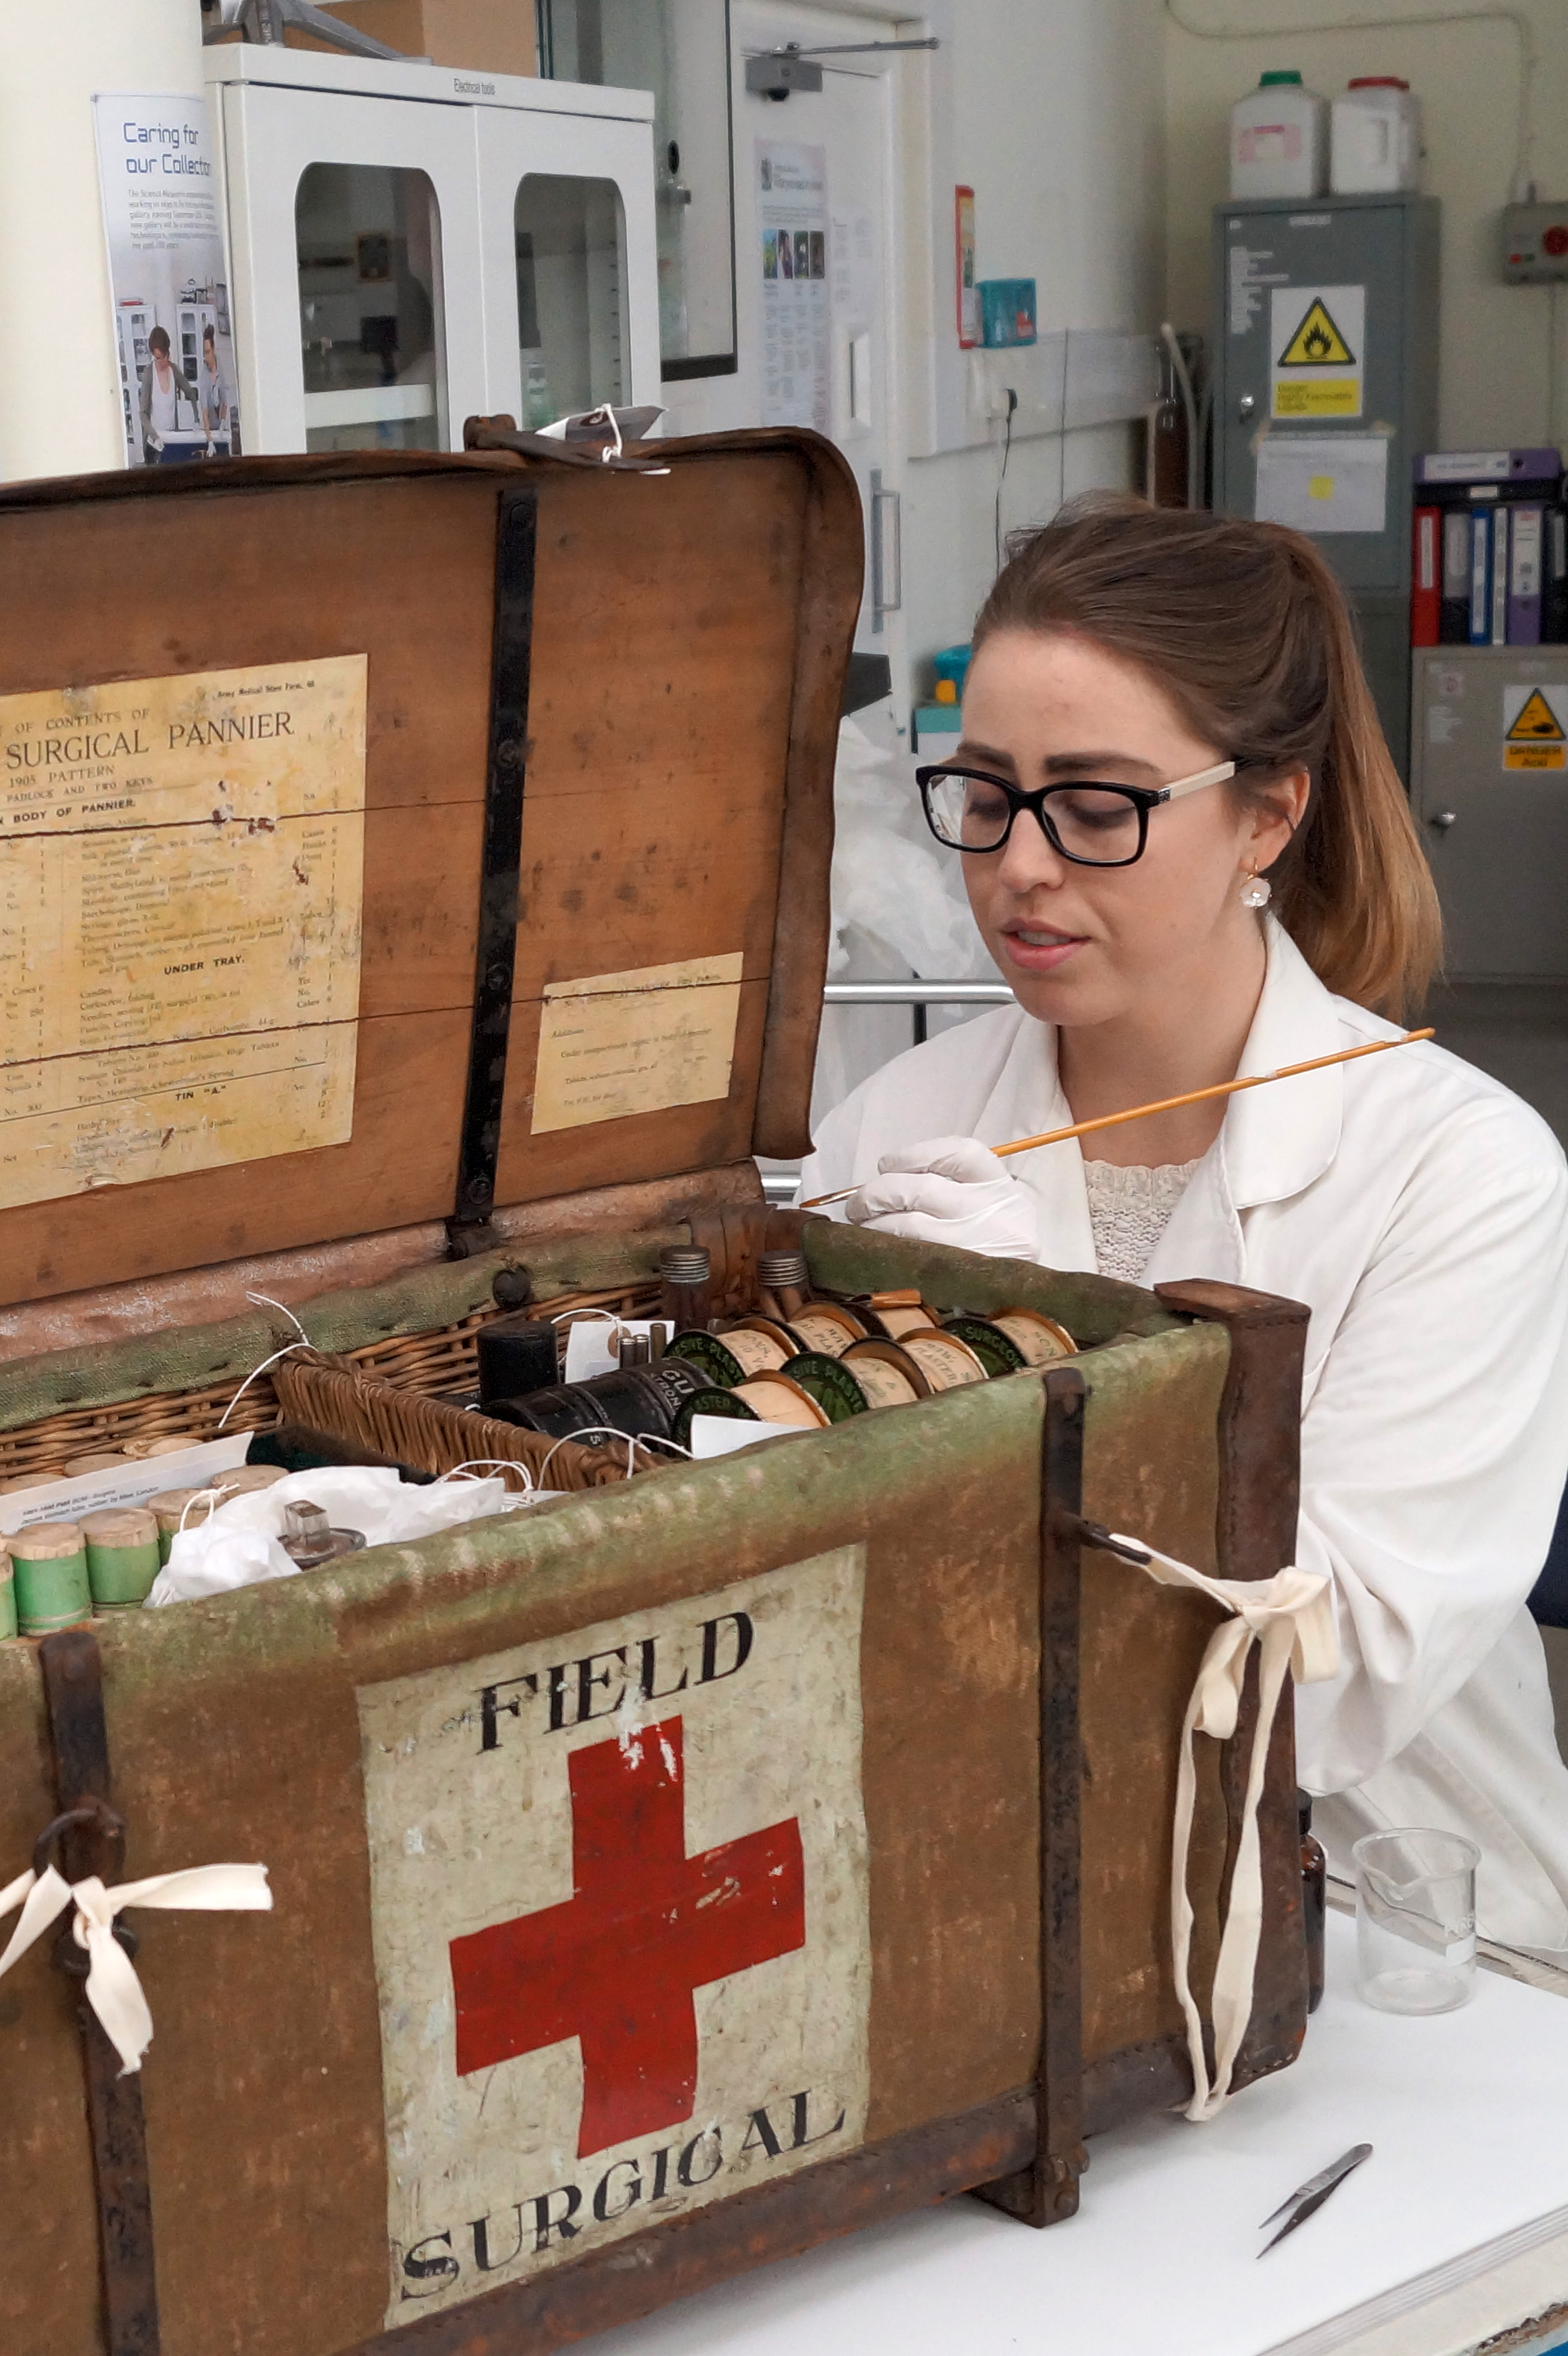 Vanessa at work conserving the field surgical pannier set. Credit: Science Museum